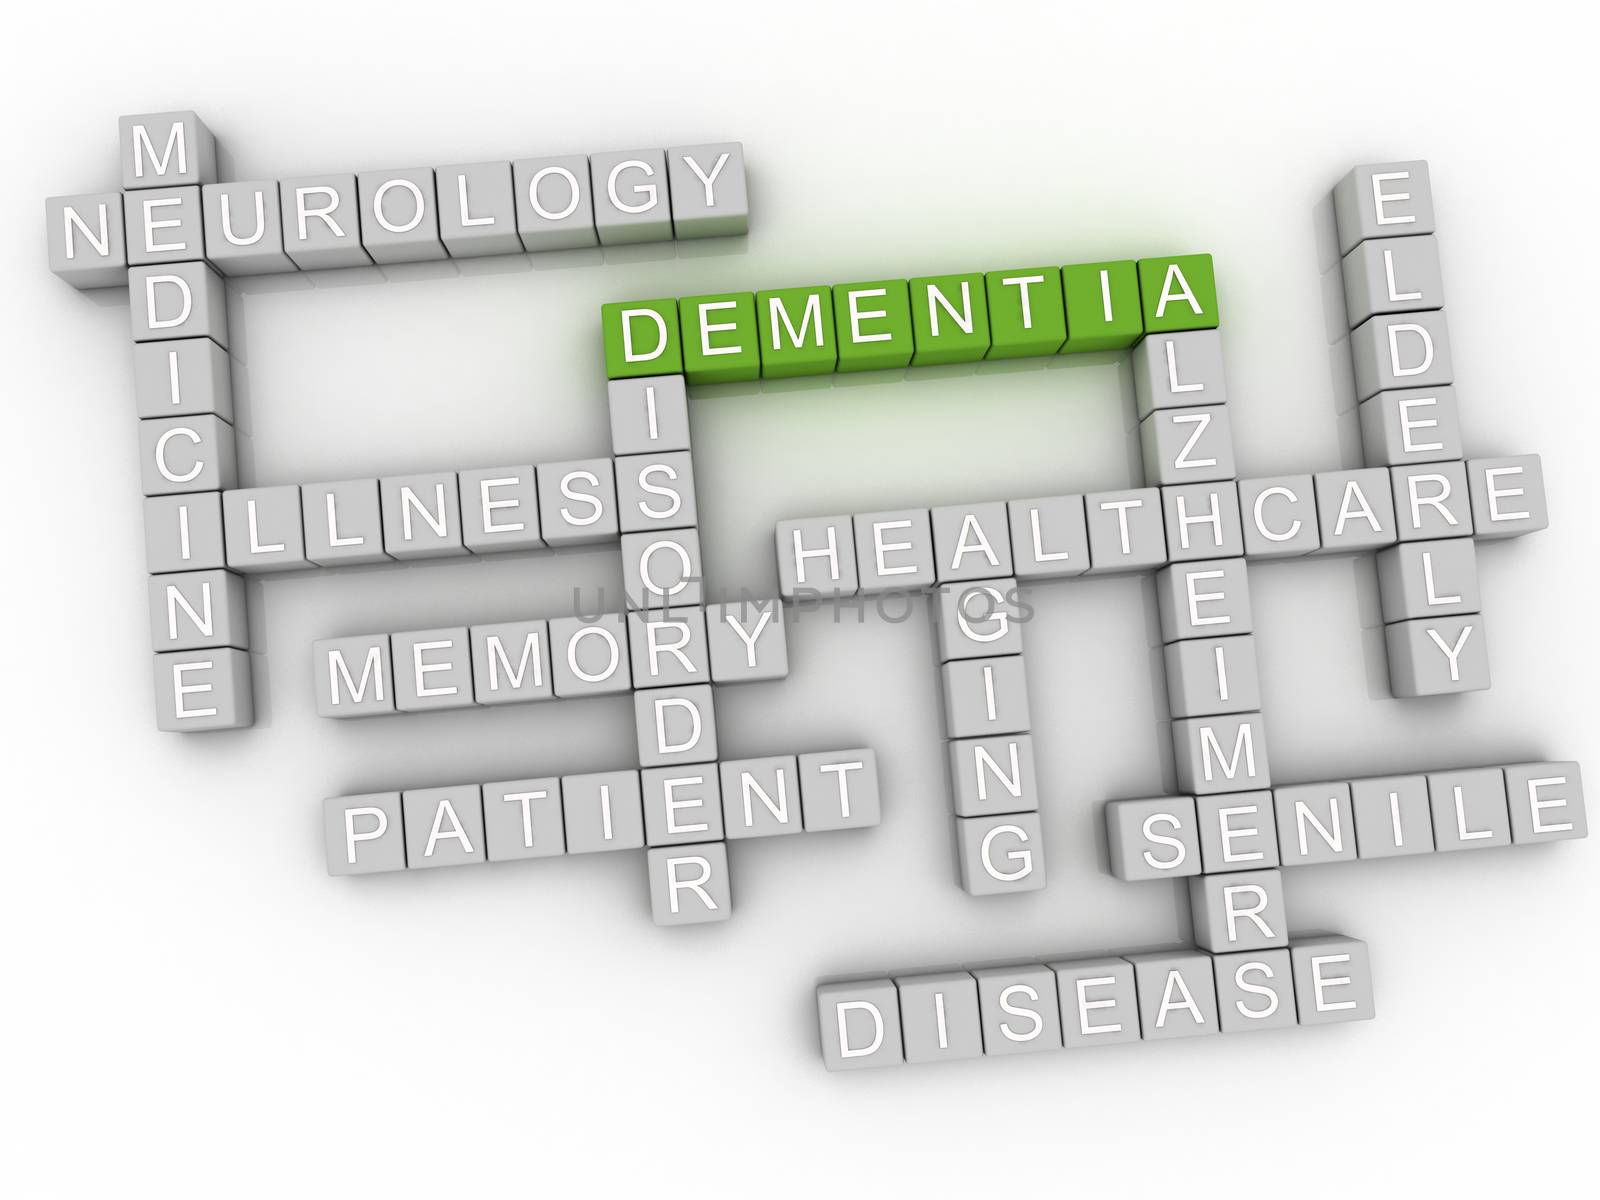 3d image Dementia issues concept word cloud background